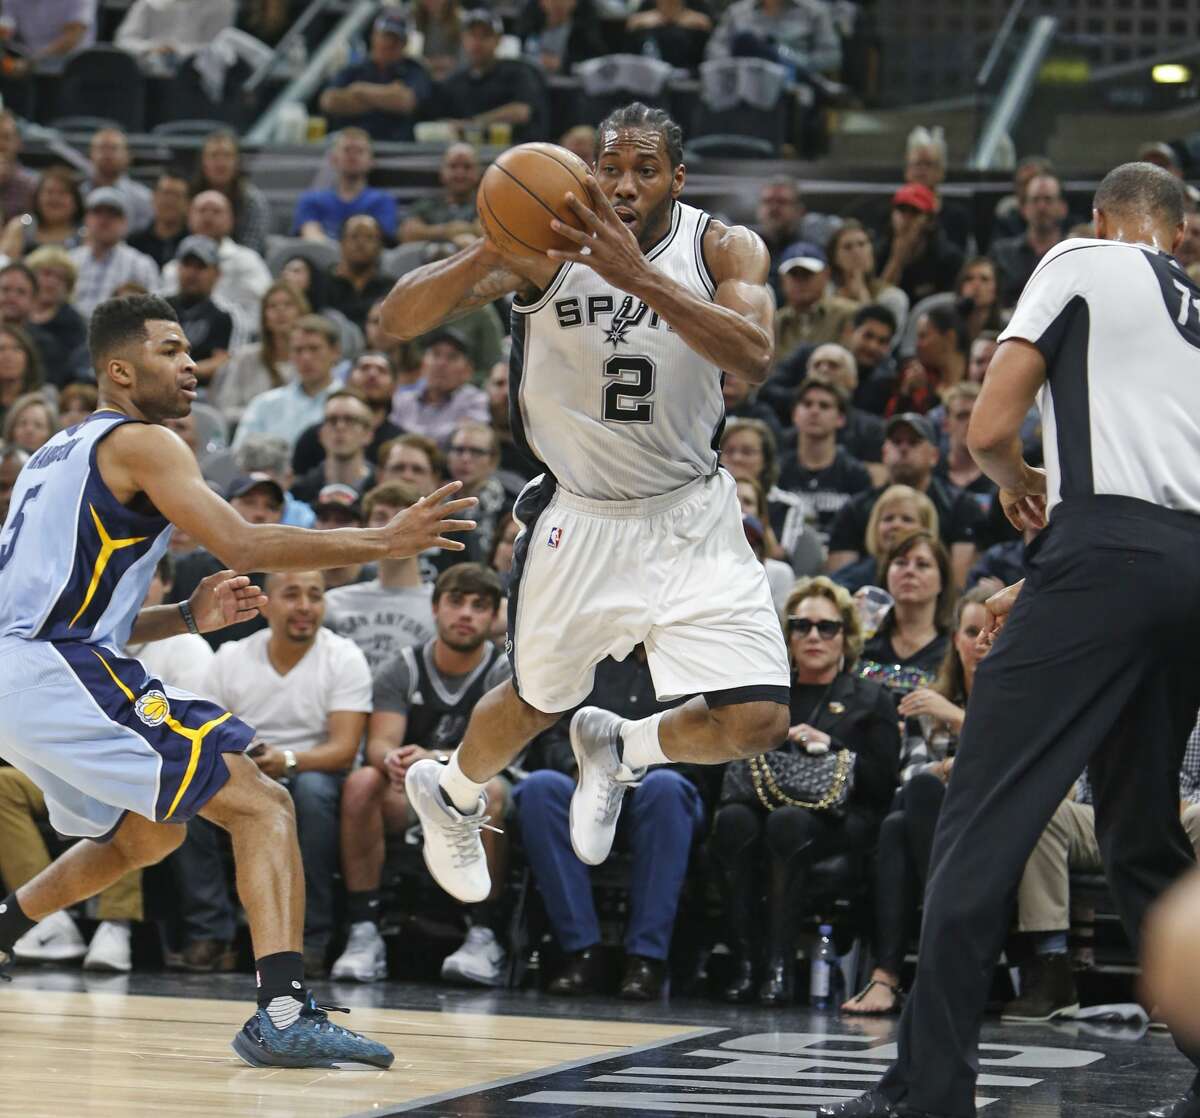 SAN ANTONIO,TX - APRIL 17: Kawhi Leonard #2 of the San Antonio Spurs tries unsuccessfully to save the ball from going out of bounds against the Memphis Grizzlies in Game Two of the Western Conference Quarterfinals during the 2017 NBA Playoffs at AT&T Center on April 17, 2017 in San Antonio, Texas. NOTE TO USER: User expressly acknowledges and agrees that , by downloading and or using this photograph, User is consenting to the terms and conditions of the Getty Images License Agreement. (Photo by Ronald Cortes/Getty Images)